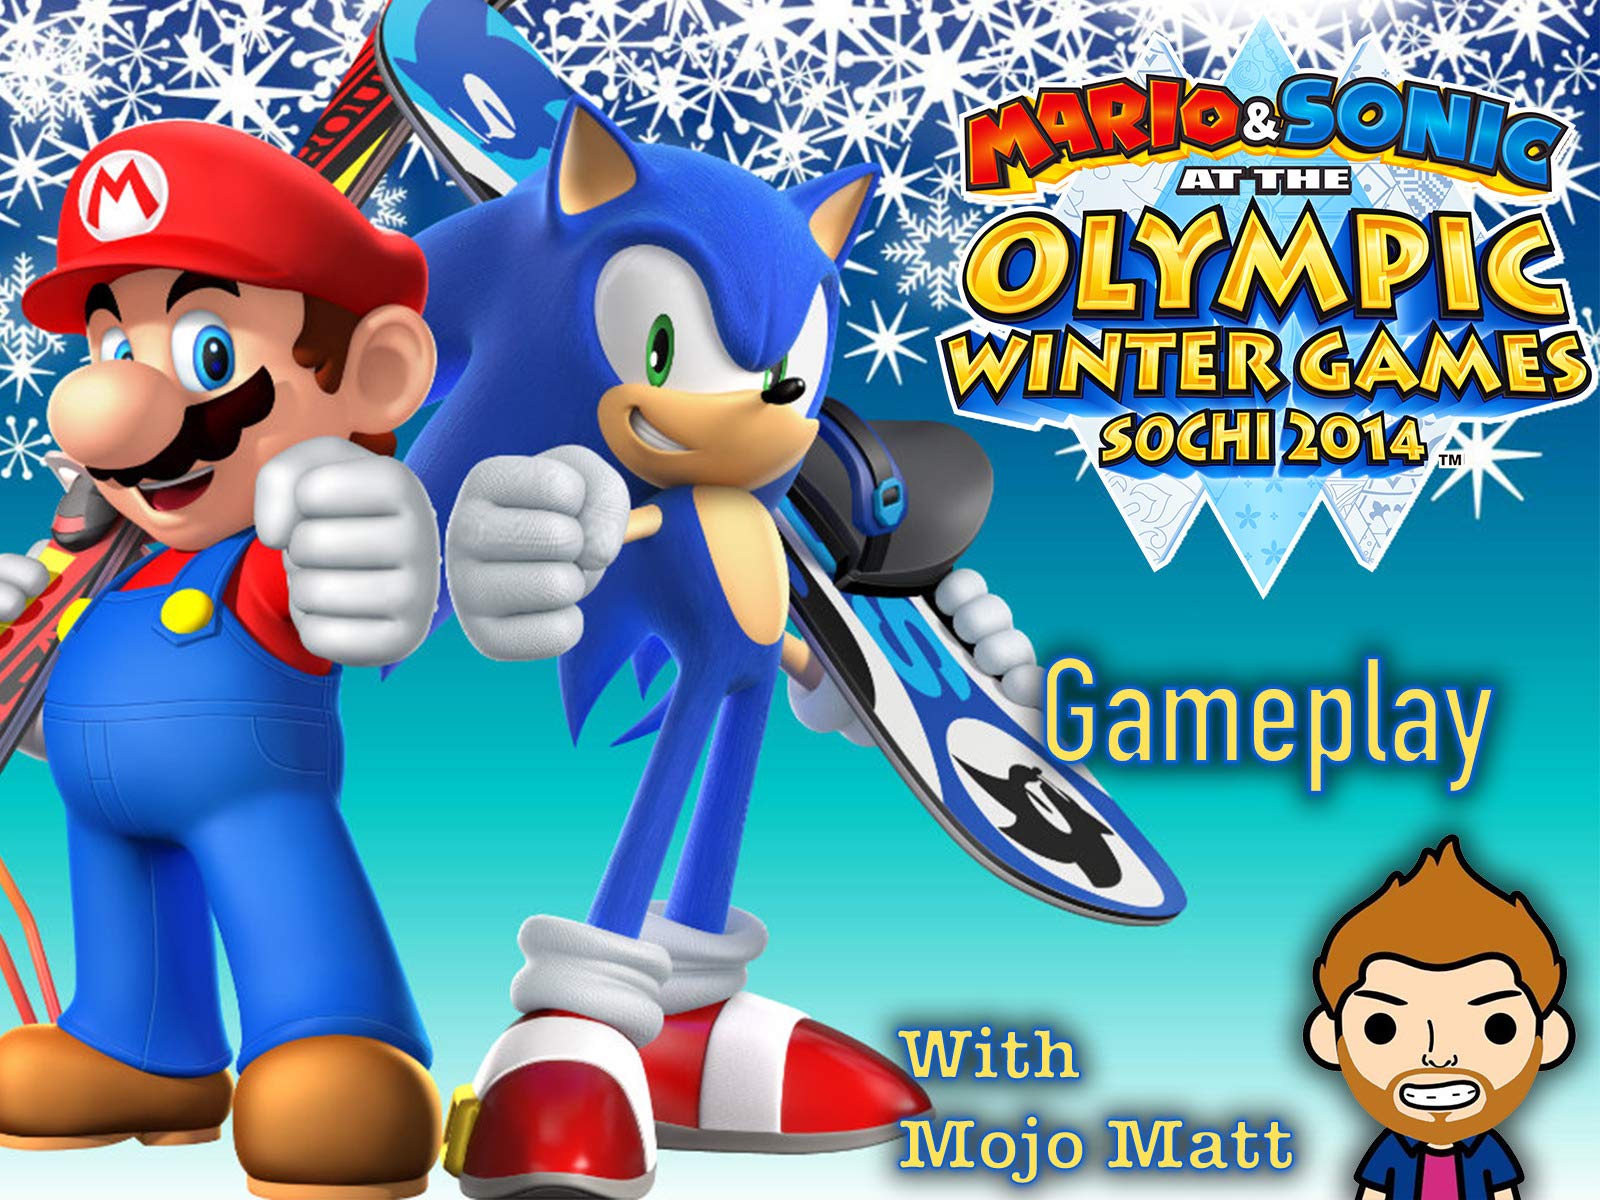 Mario & Sonic at the Olympic Games Wallpapers